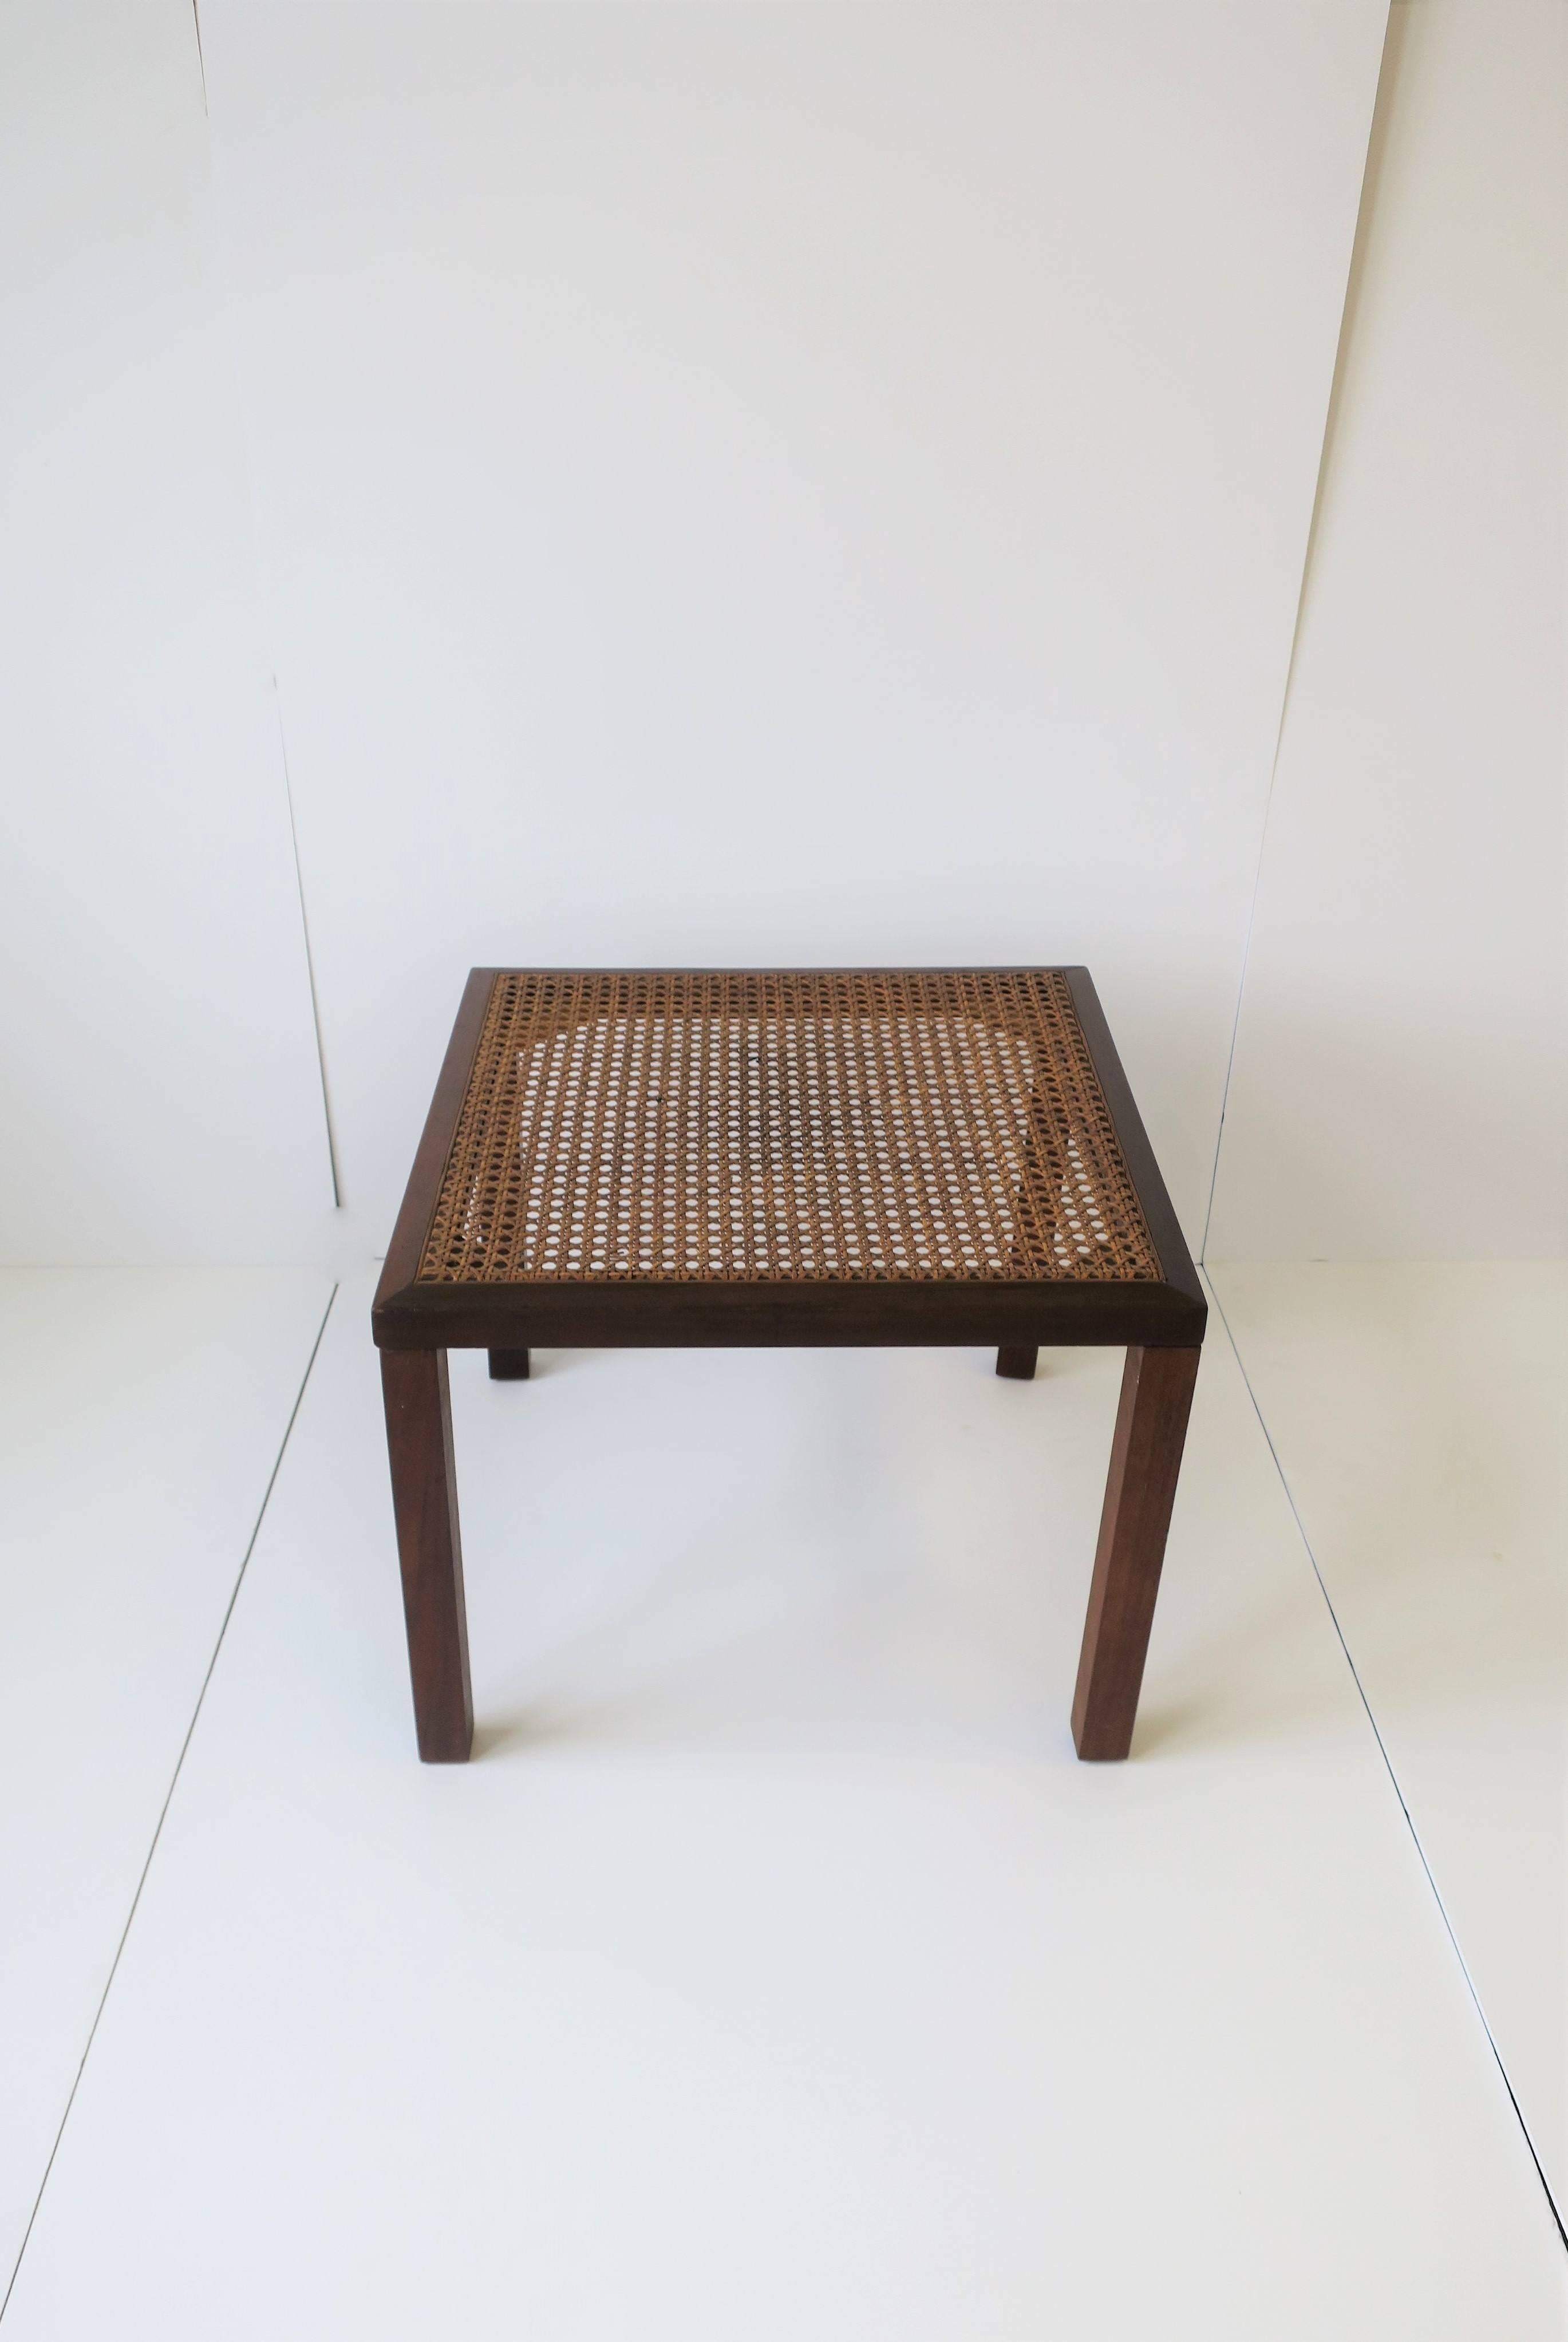 A beautiful vintage square wood and cane top side or end table. Table has a rich wood frame, square legs and cane top. 

Measurements: 17.5 in. x 17.75 in. x 14 in. H.